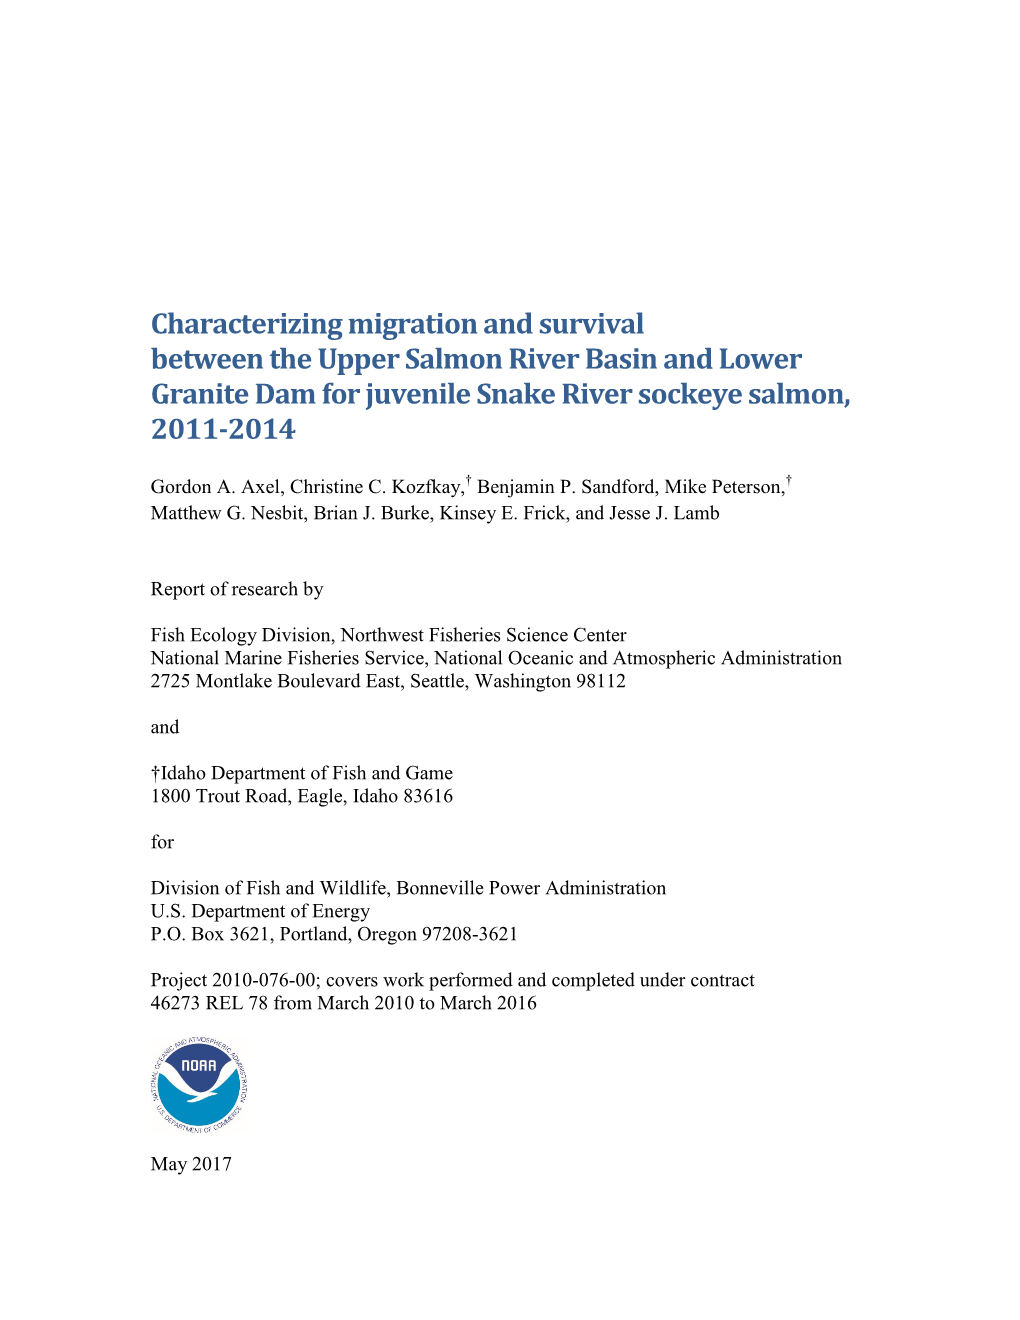 Characterizing Migration and Survival Between the Upper Salmon River Basin and Lower Granite Dam for Juvenile Snake River Sockeye Salmon, 2011-2014